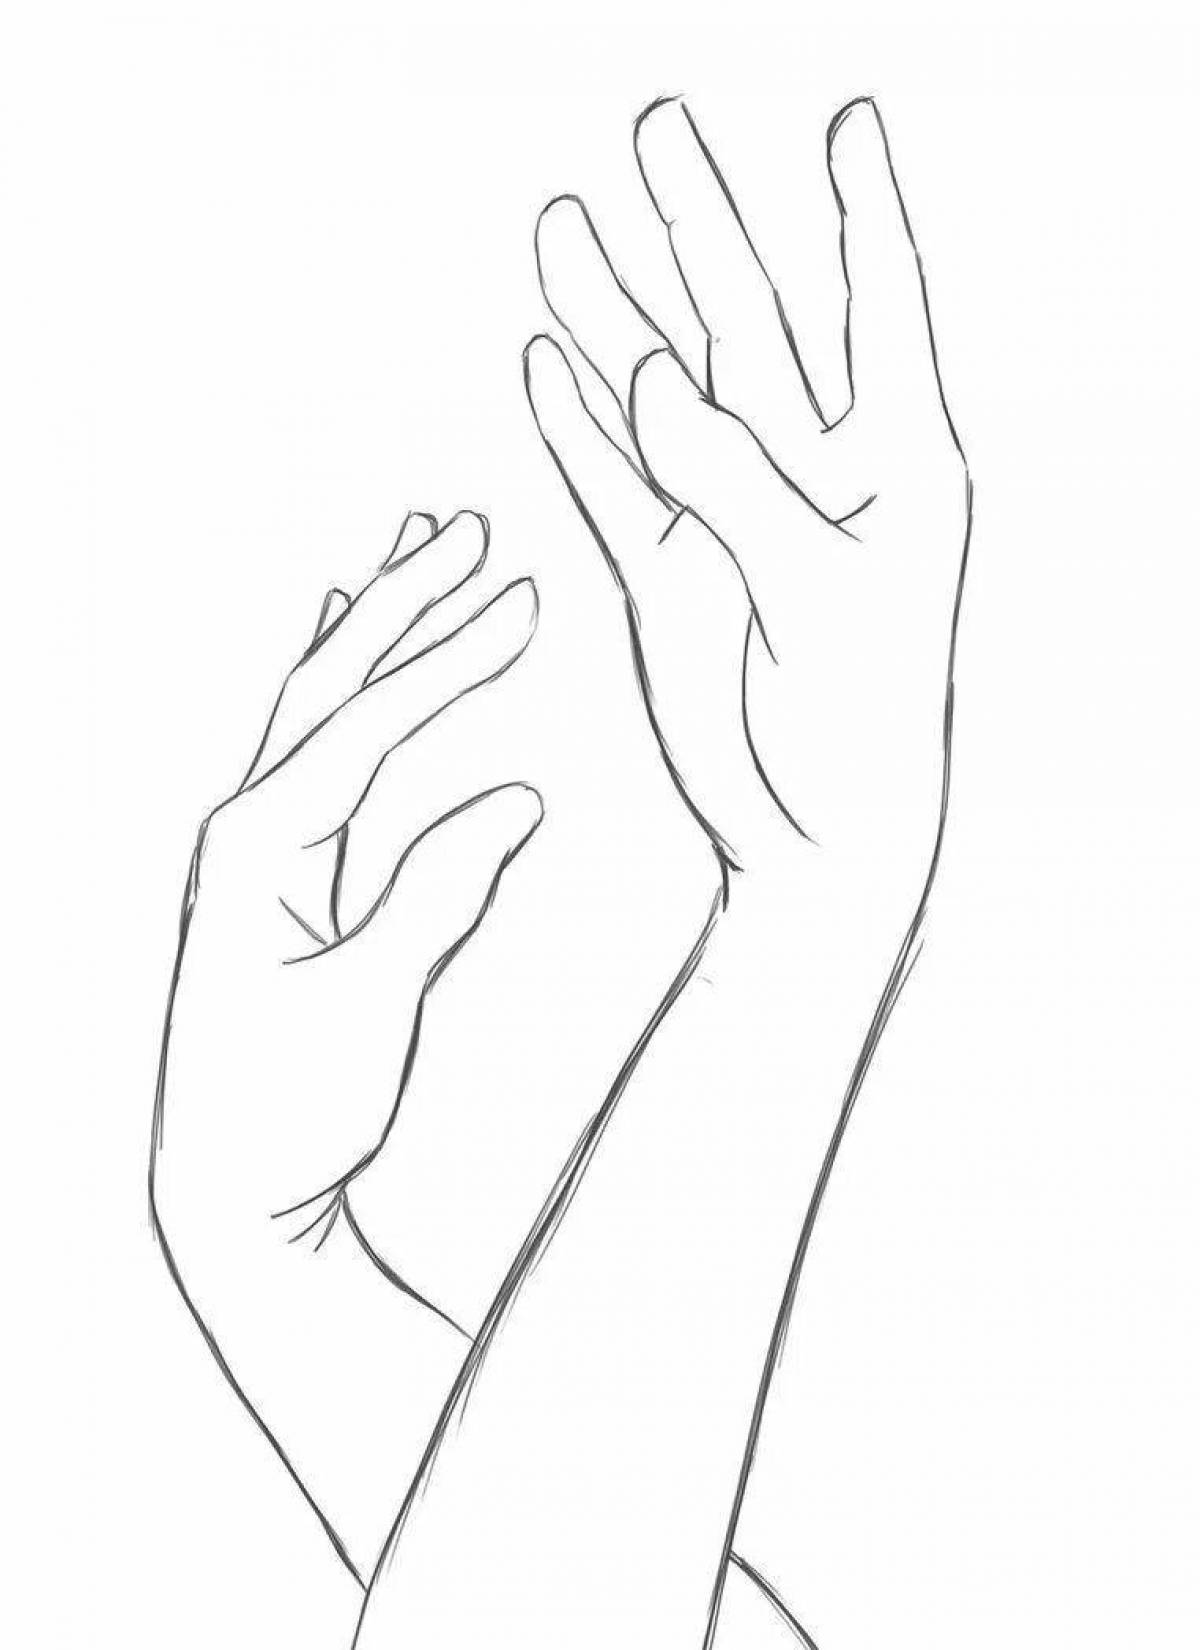 Coloring page of a serene female hand